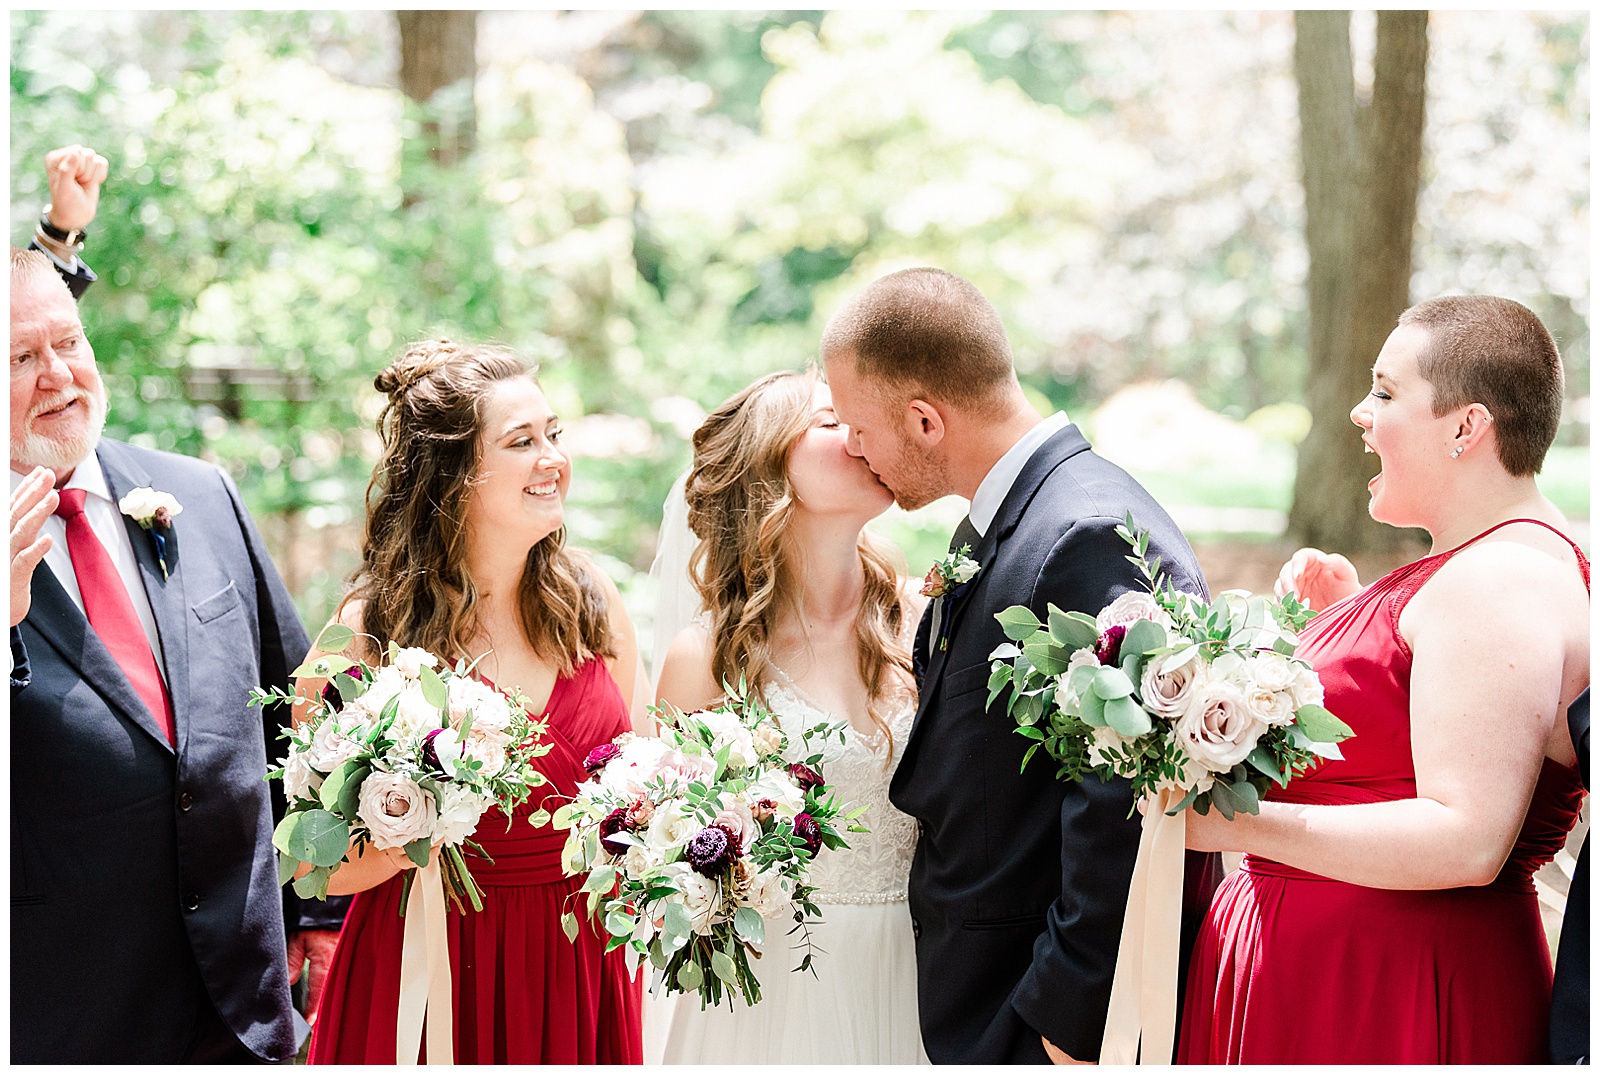 Stunning Bridal Party Photo from Elegant Modern Red and Navy Blue Themed Wedding in Charlotte, NC | check out the full wedding at KevynDixonPhoto.com